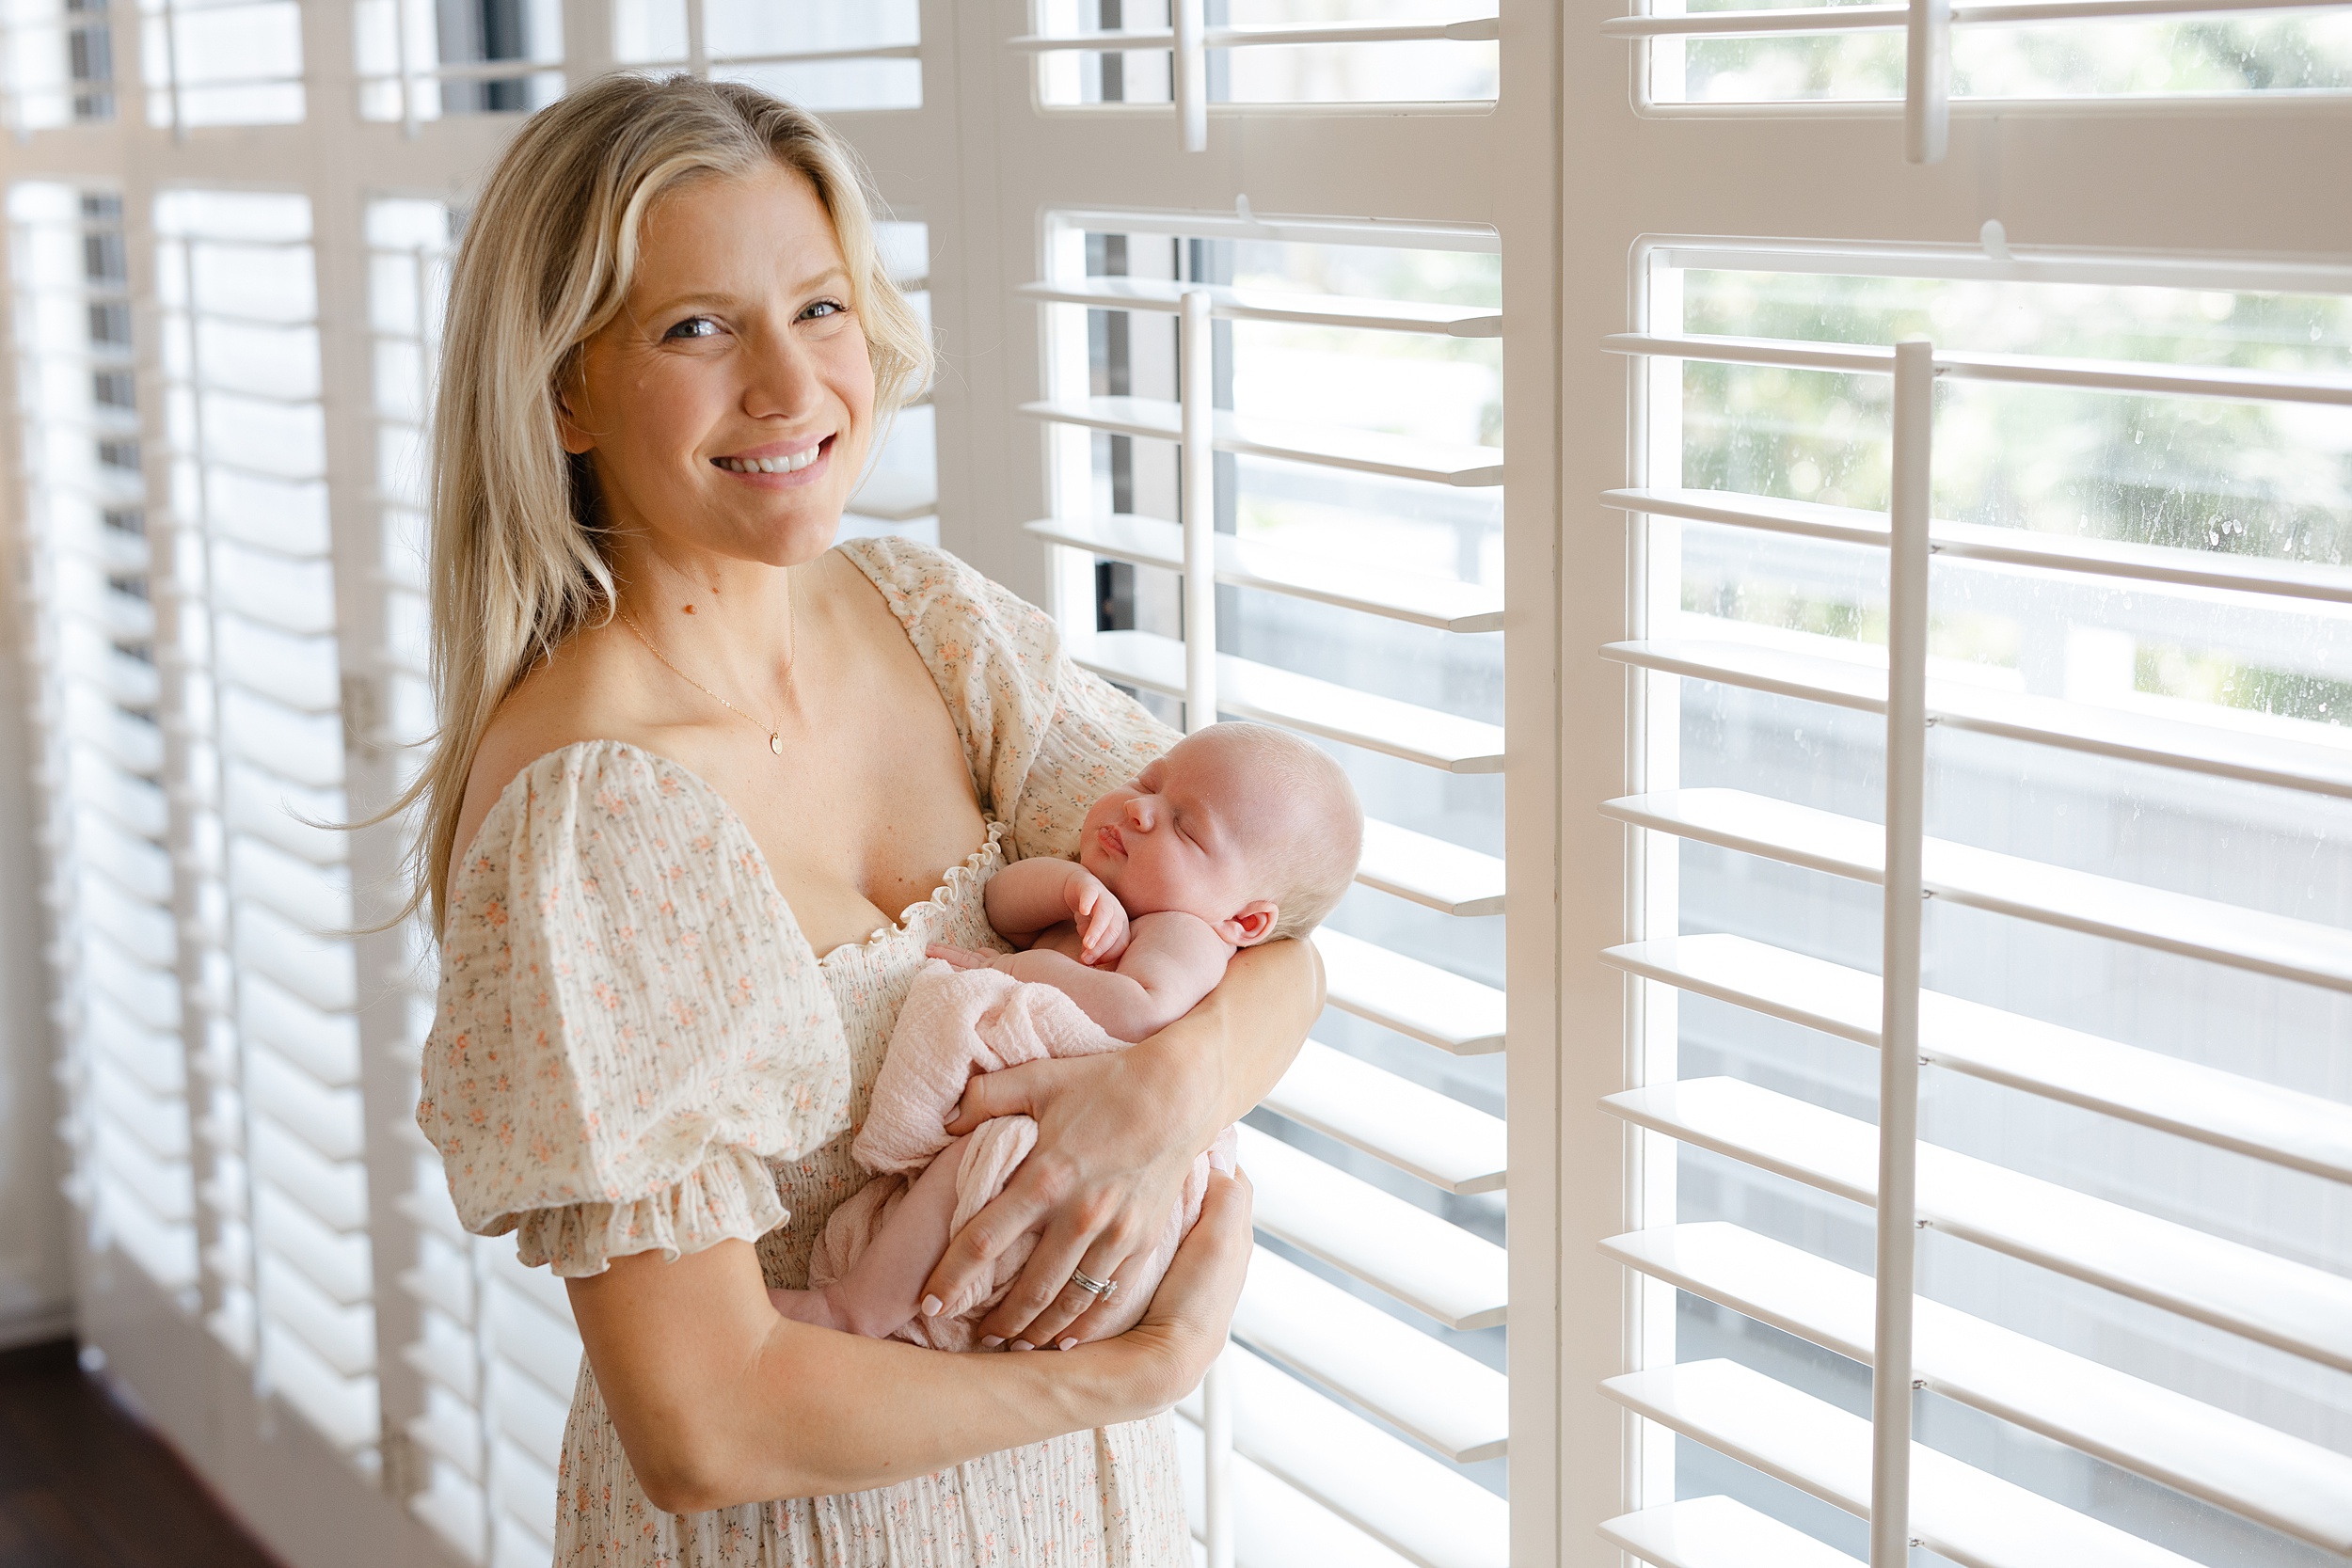 A happy new mother stands in a window in a floral print dress holding her sleeping newborn baby thanks to baby sleep consultant orange county